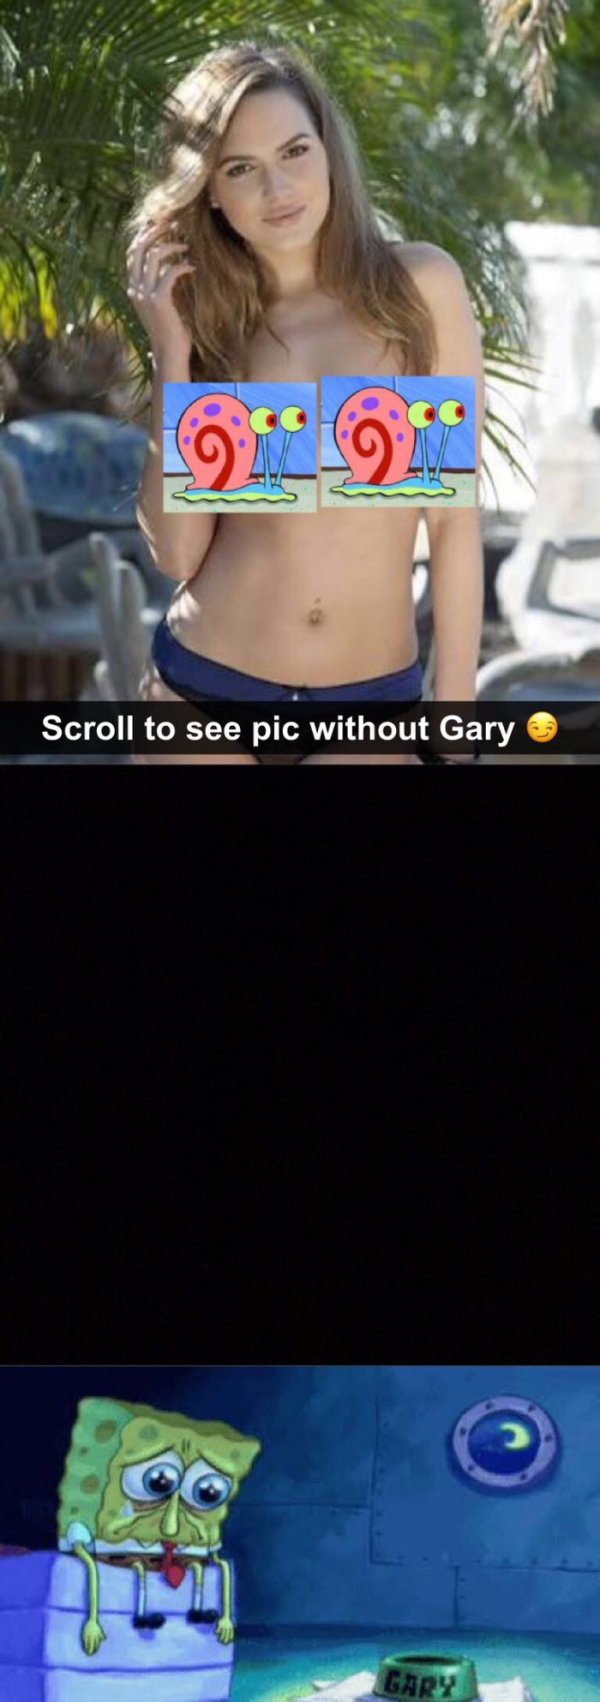 swipe for pic without gary - Scroll to see pic without Gary